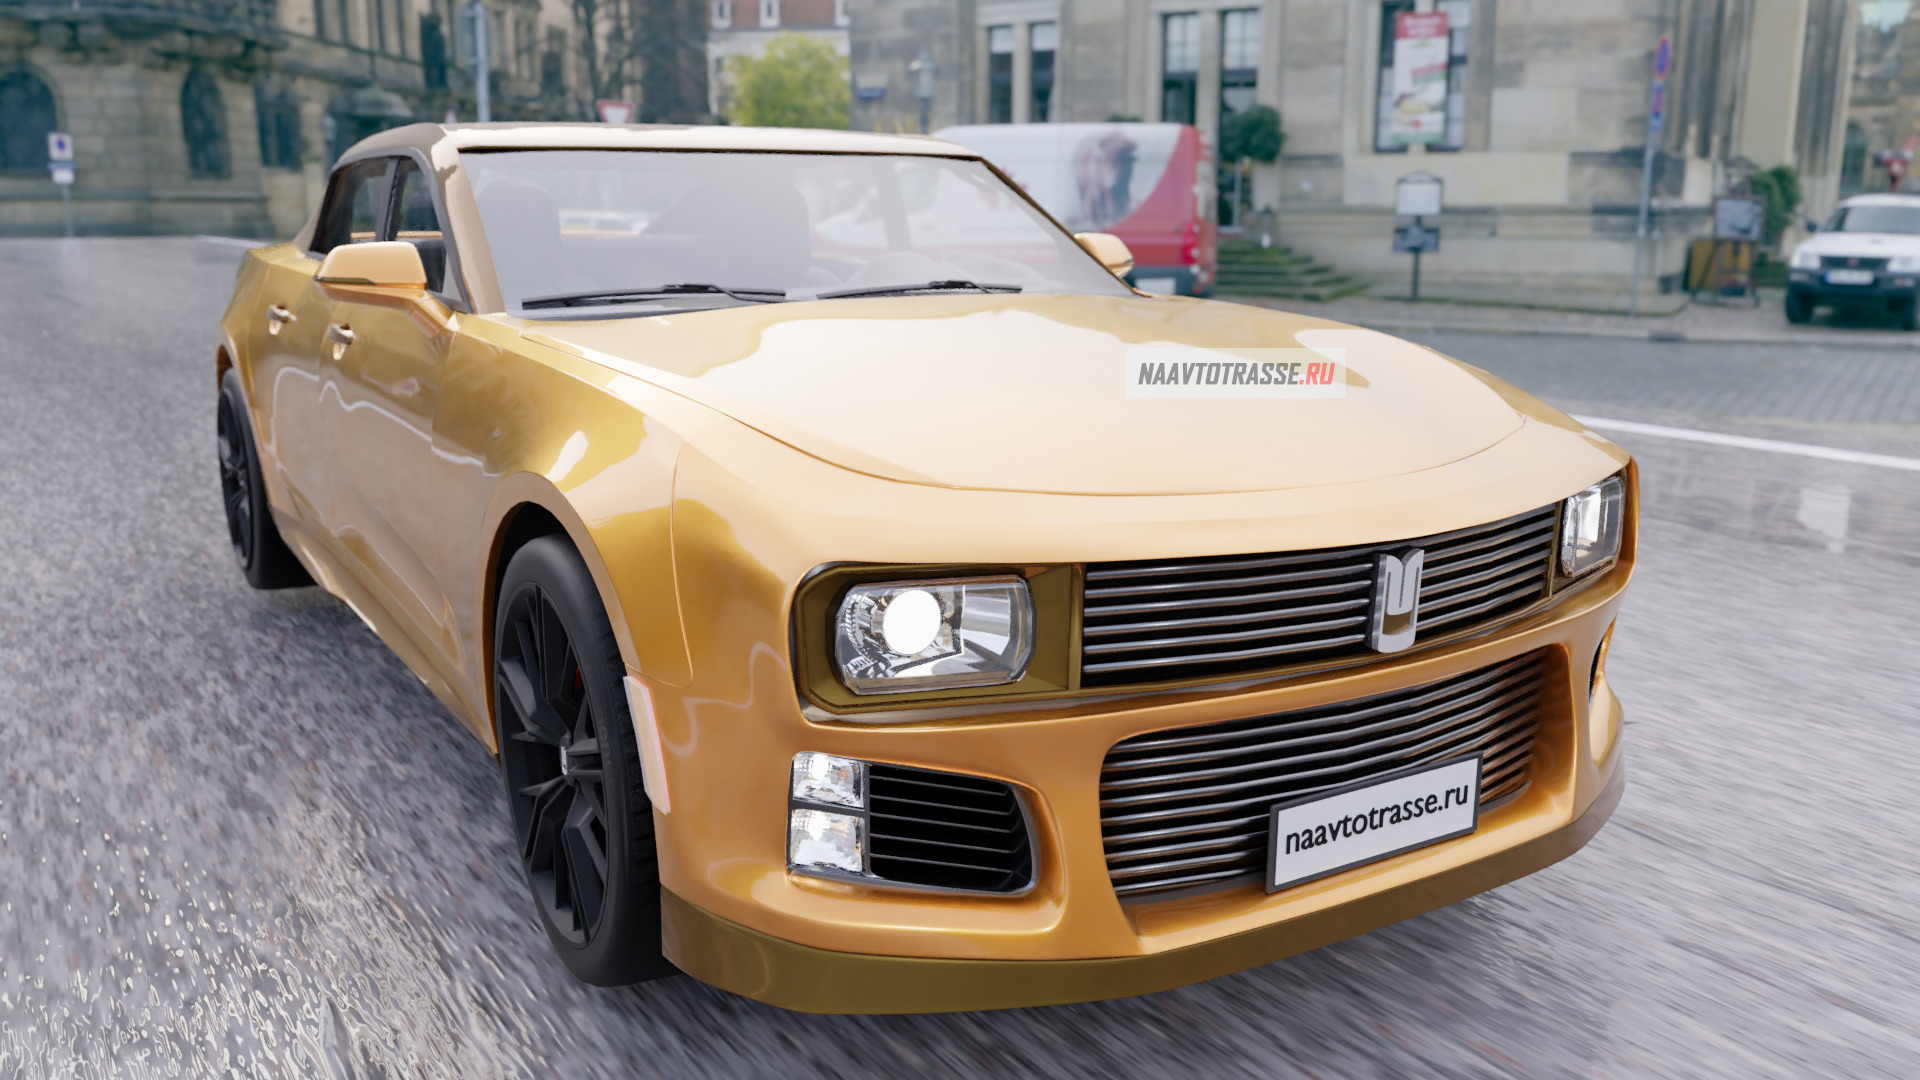 The revived Moskvich412 20222023 sedan is presented, which could